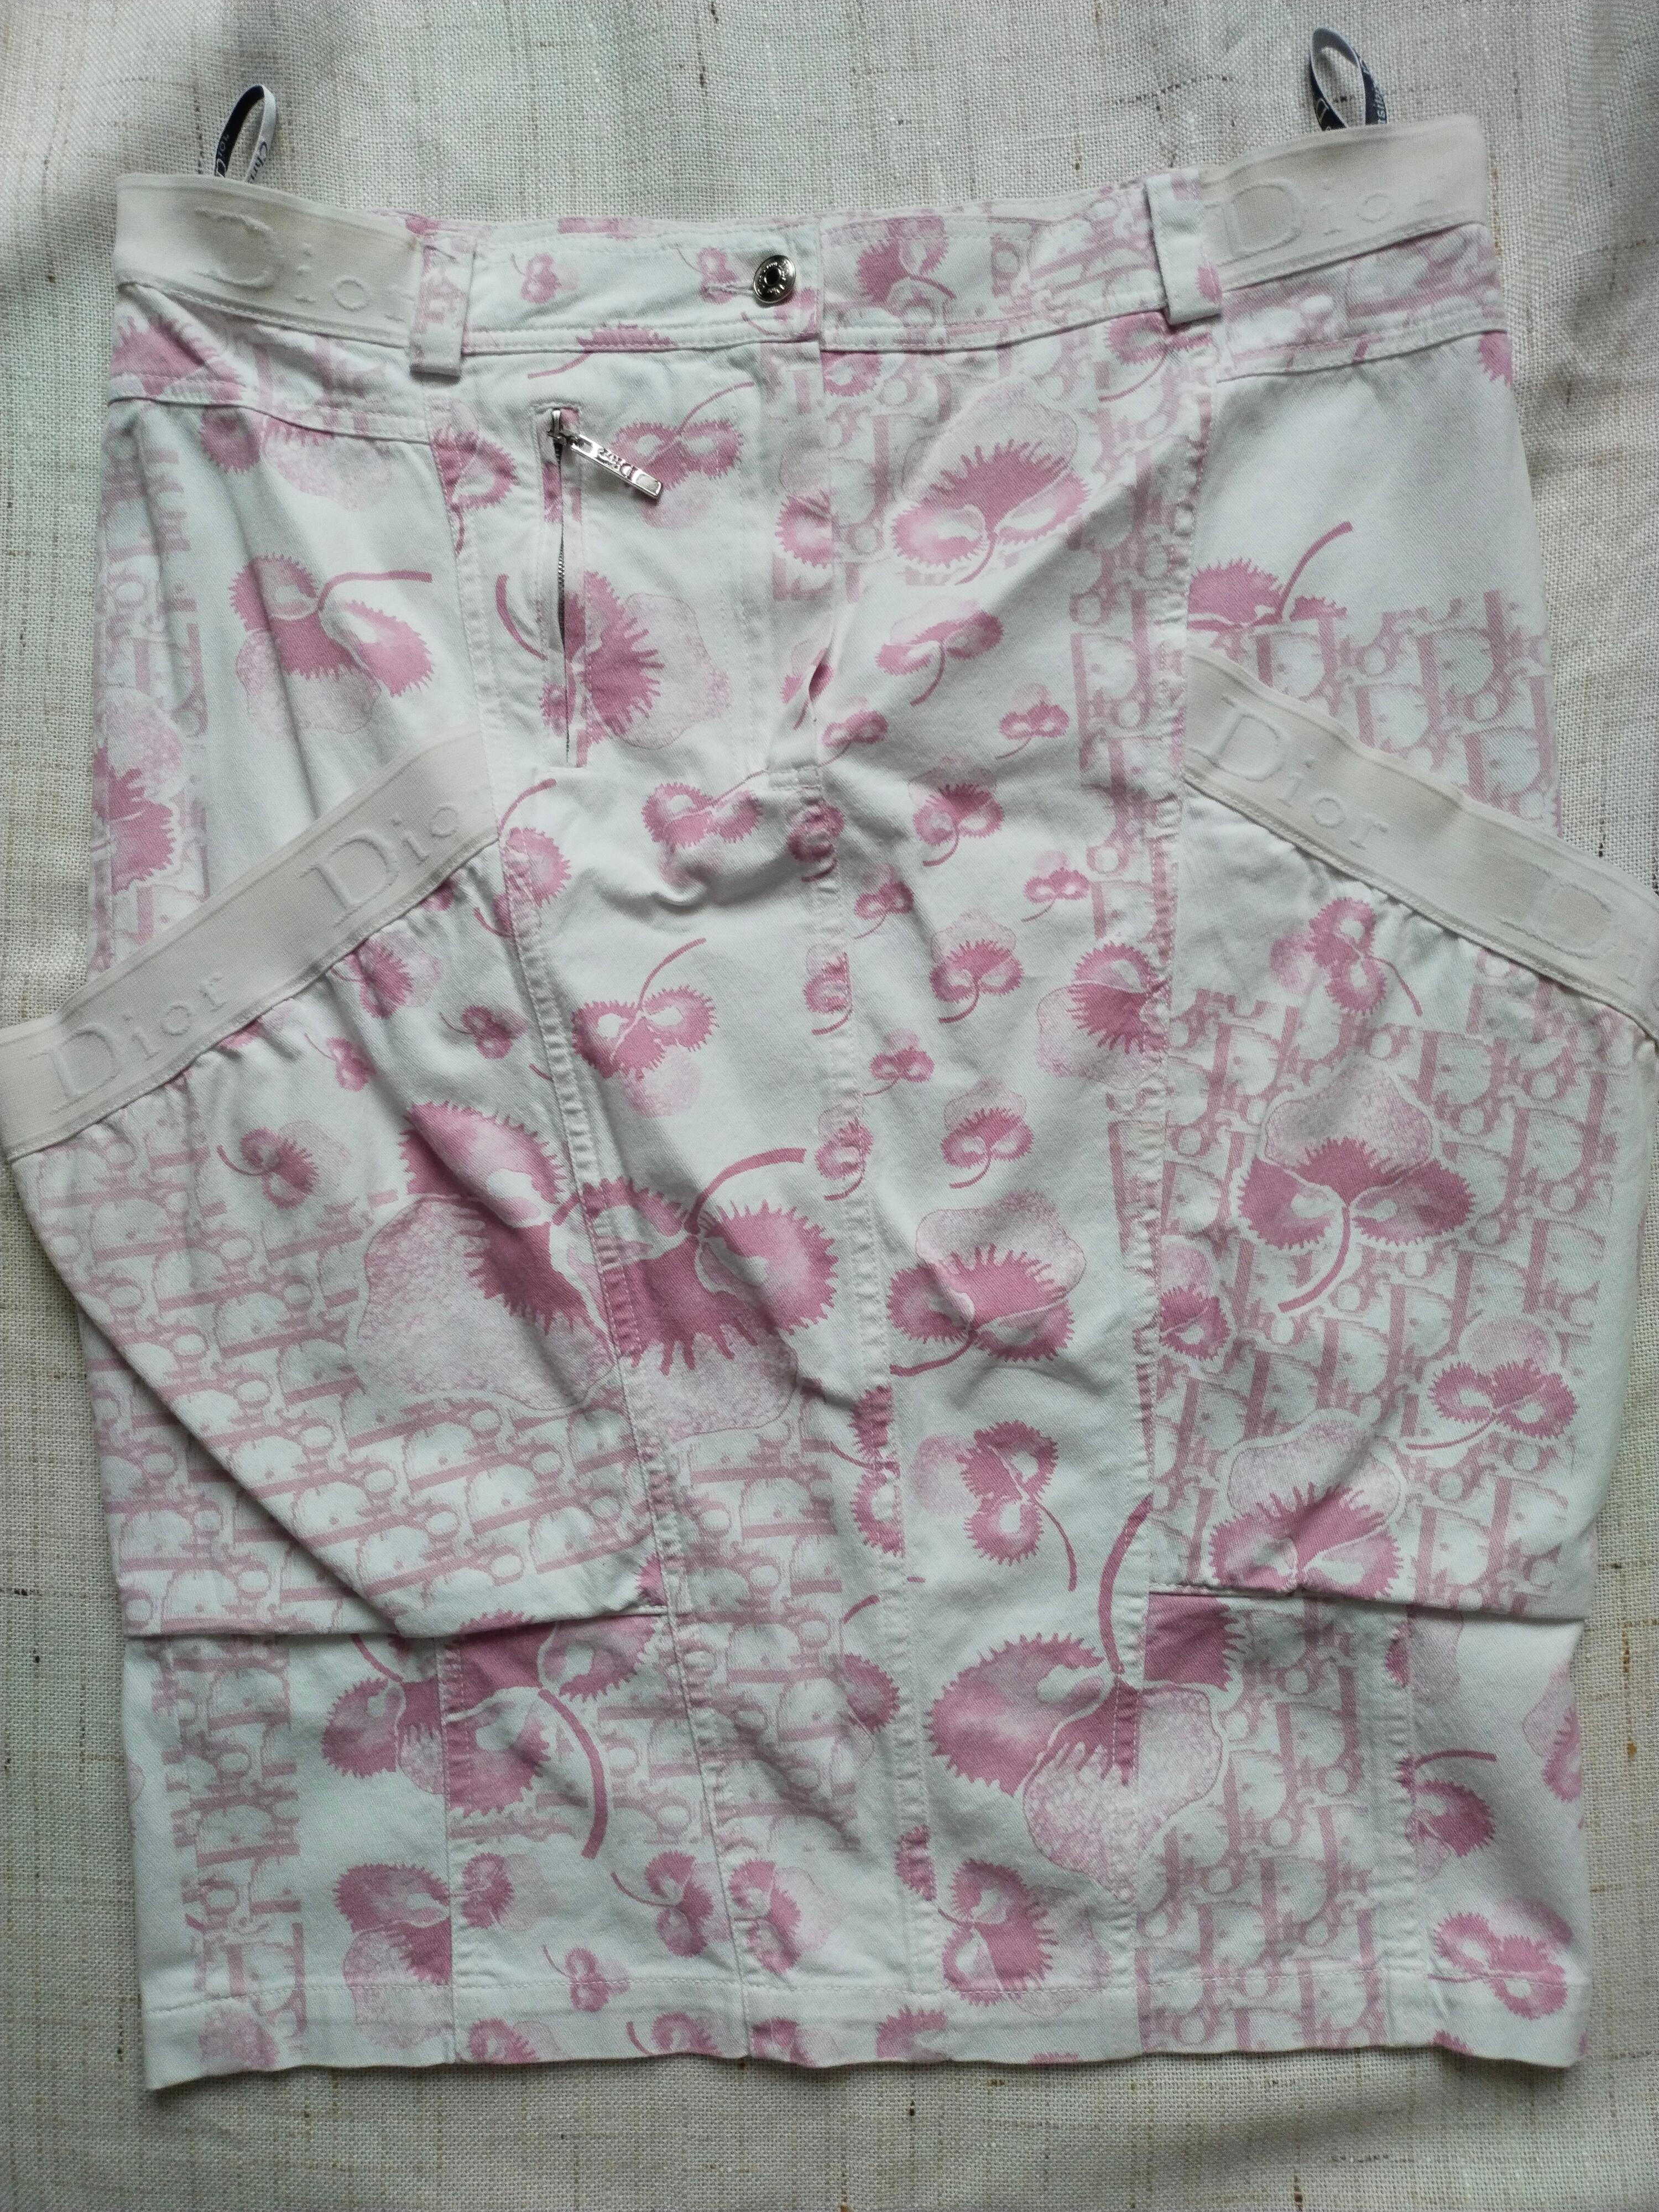 Women's Christian Dior & Galliano 2005 Skirt Barbie pink cherry blossom diorissimo Y2K For Sale